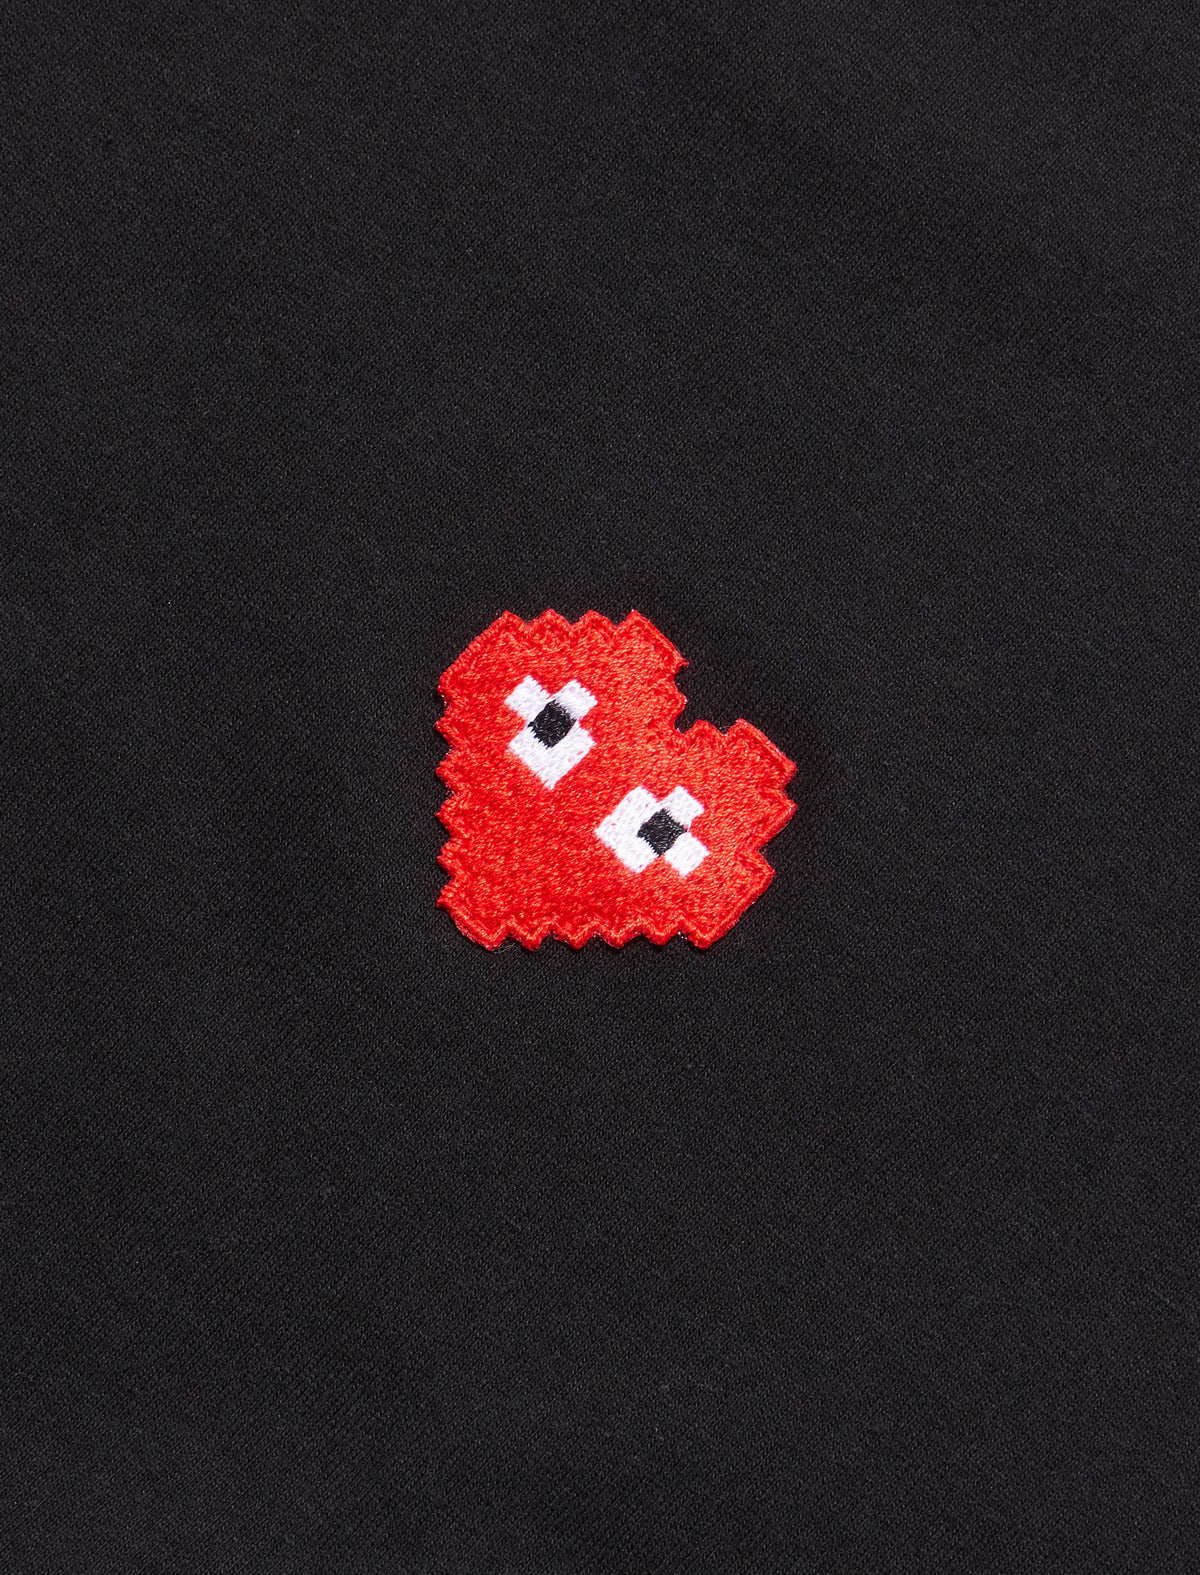 CDG PLAY is now at APB! – APB Store